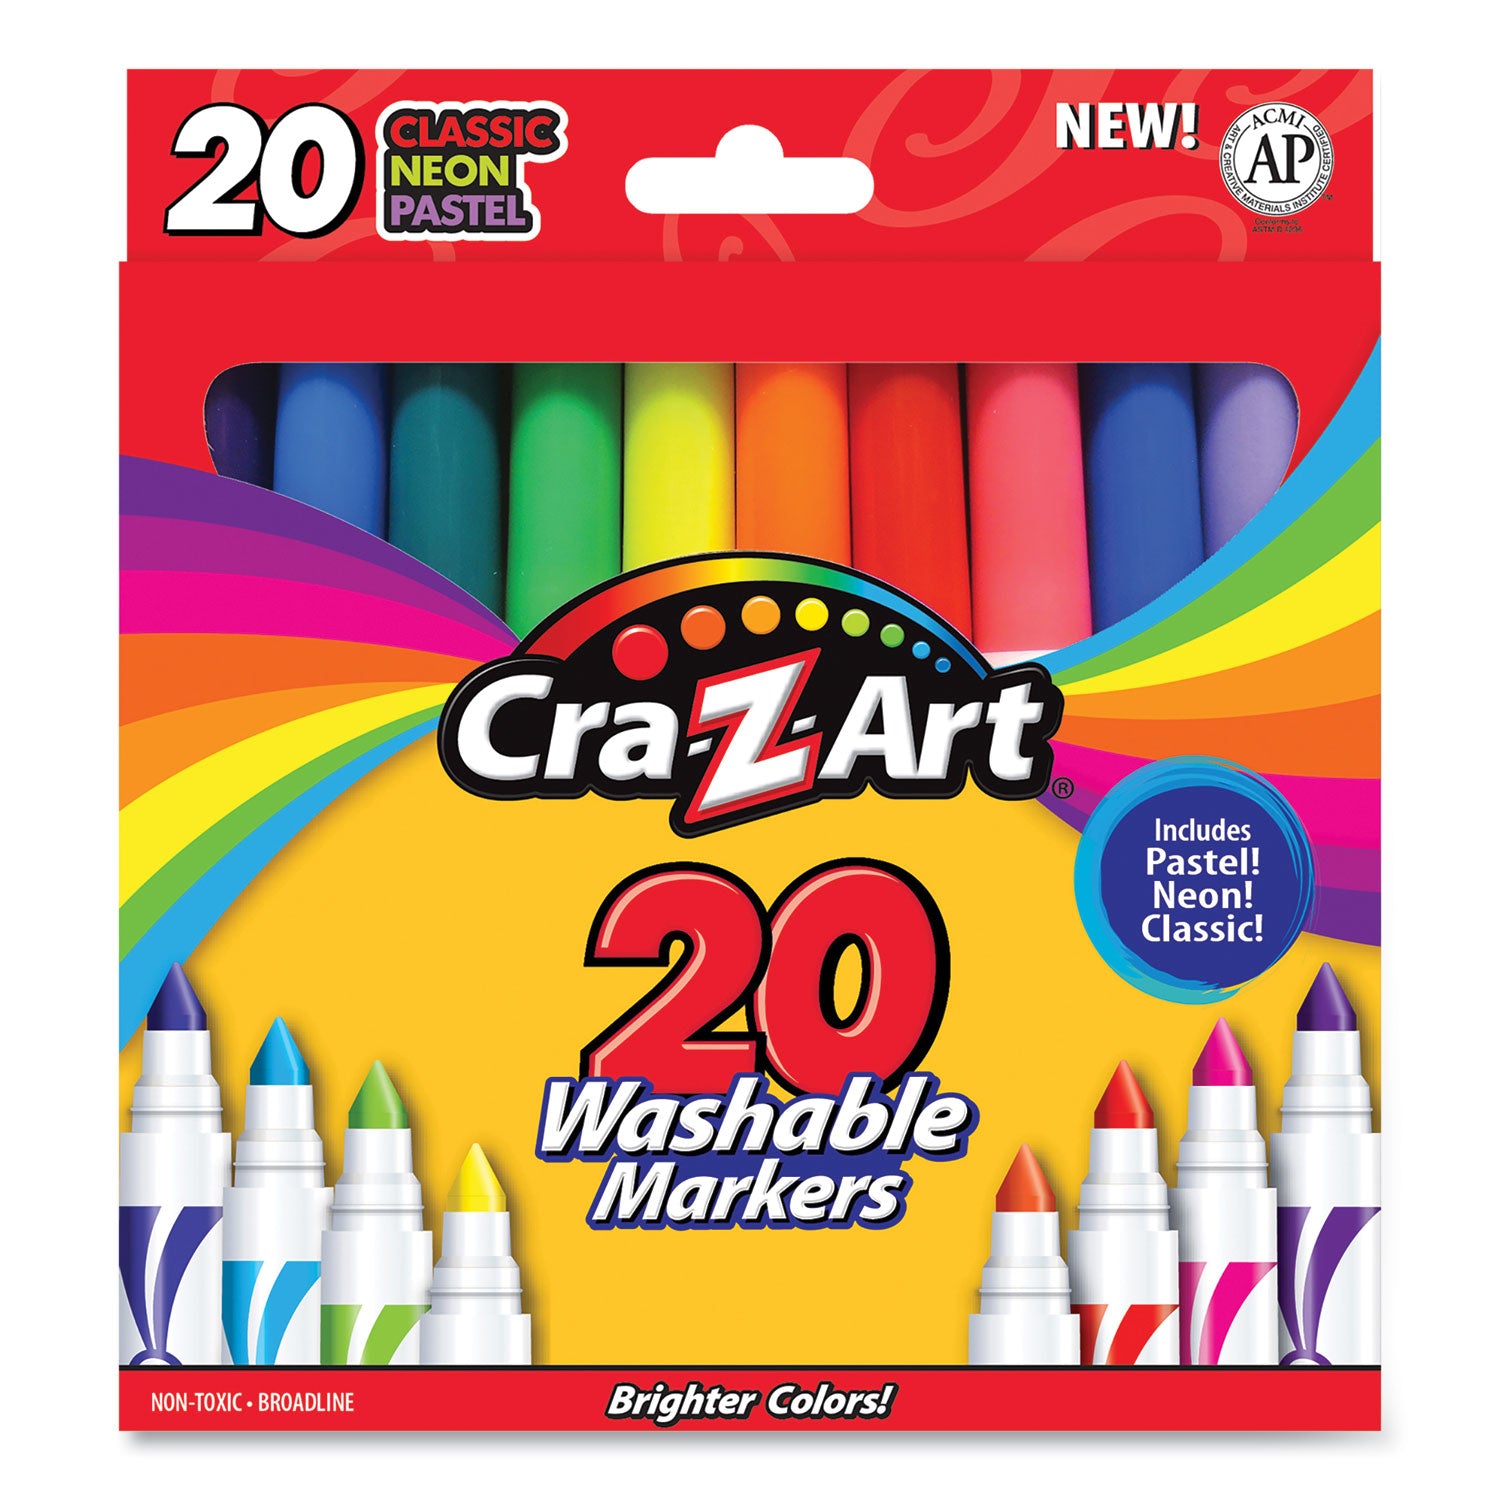 washable-markers-broad-bullet-tip-assorted-classic-neon-pastel-colors-20-set_cza44402wm20 - 1